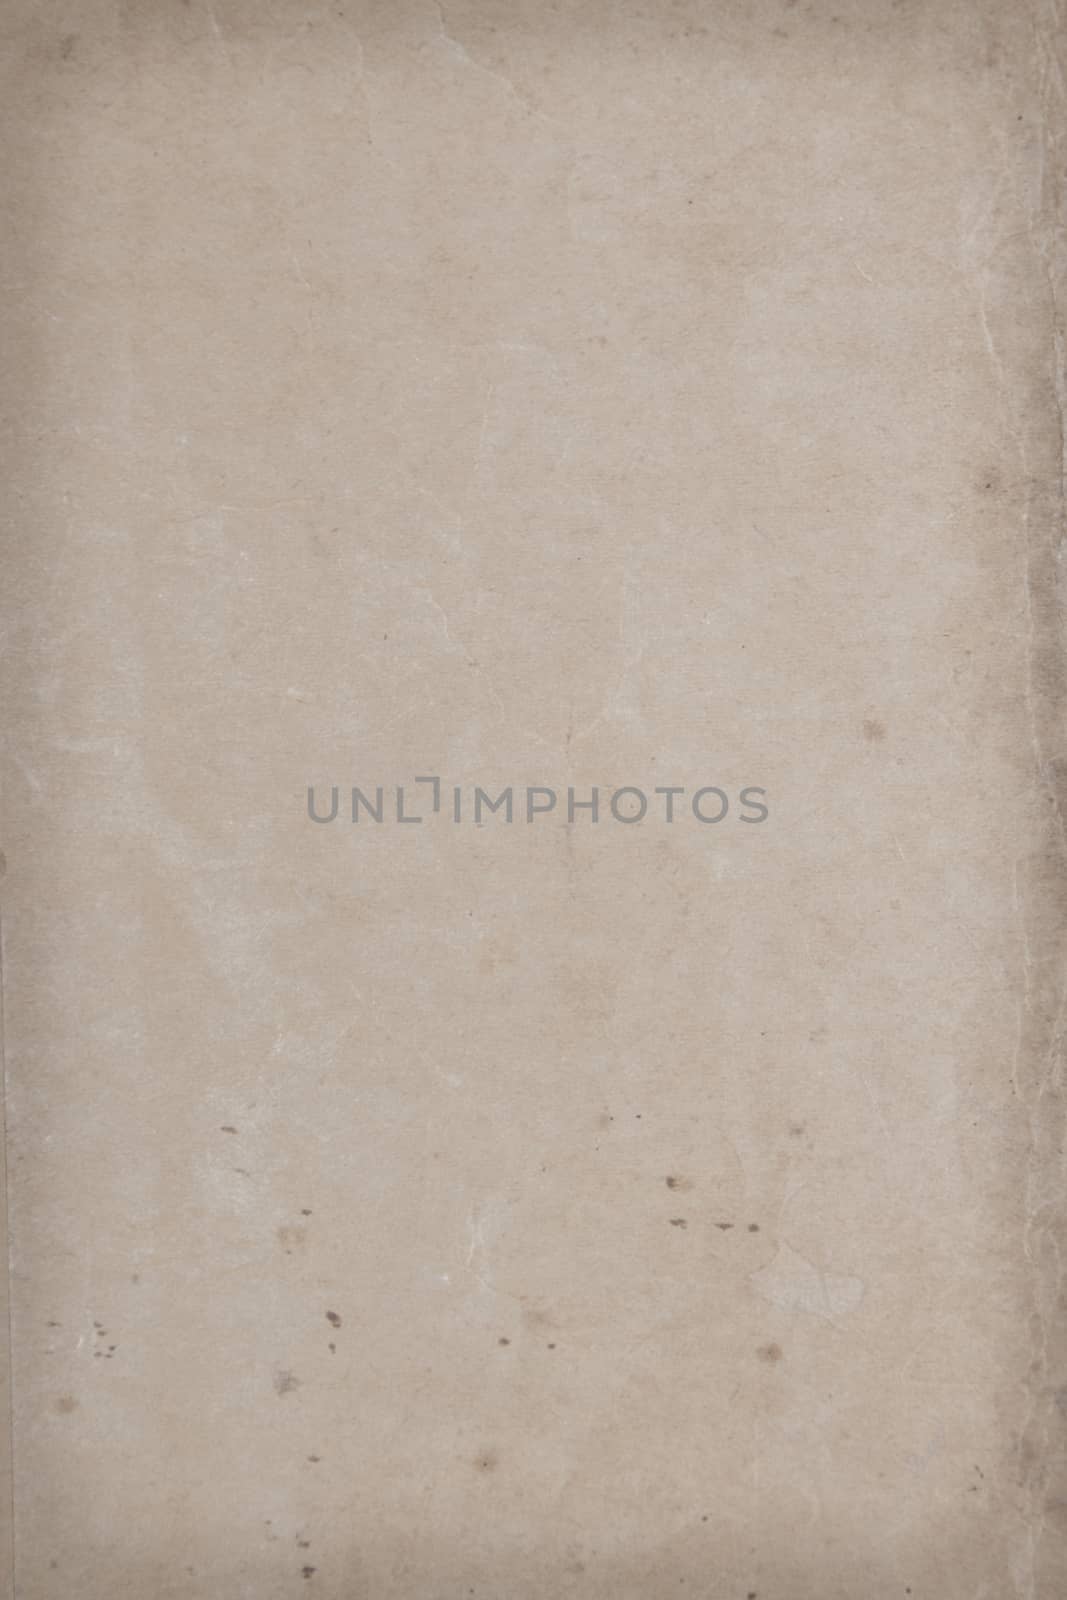 Old paper texture perfect background for your design